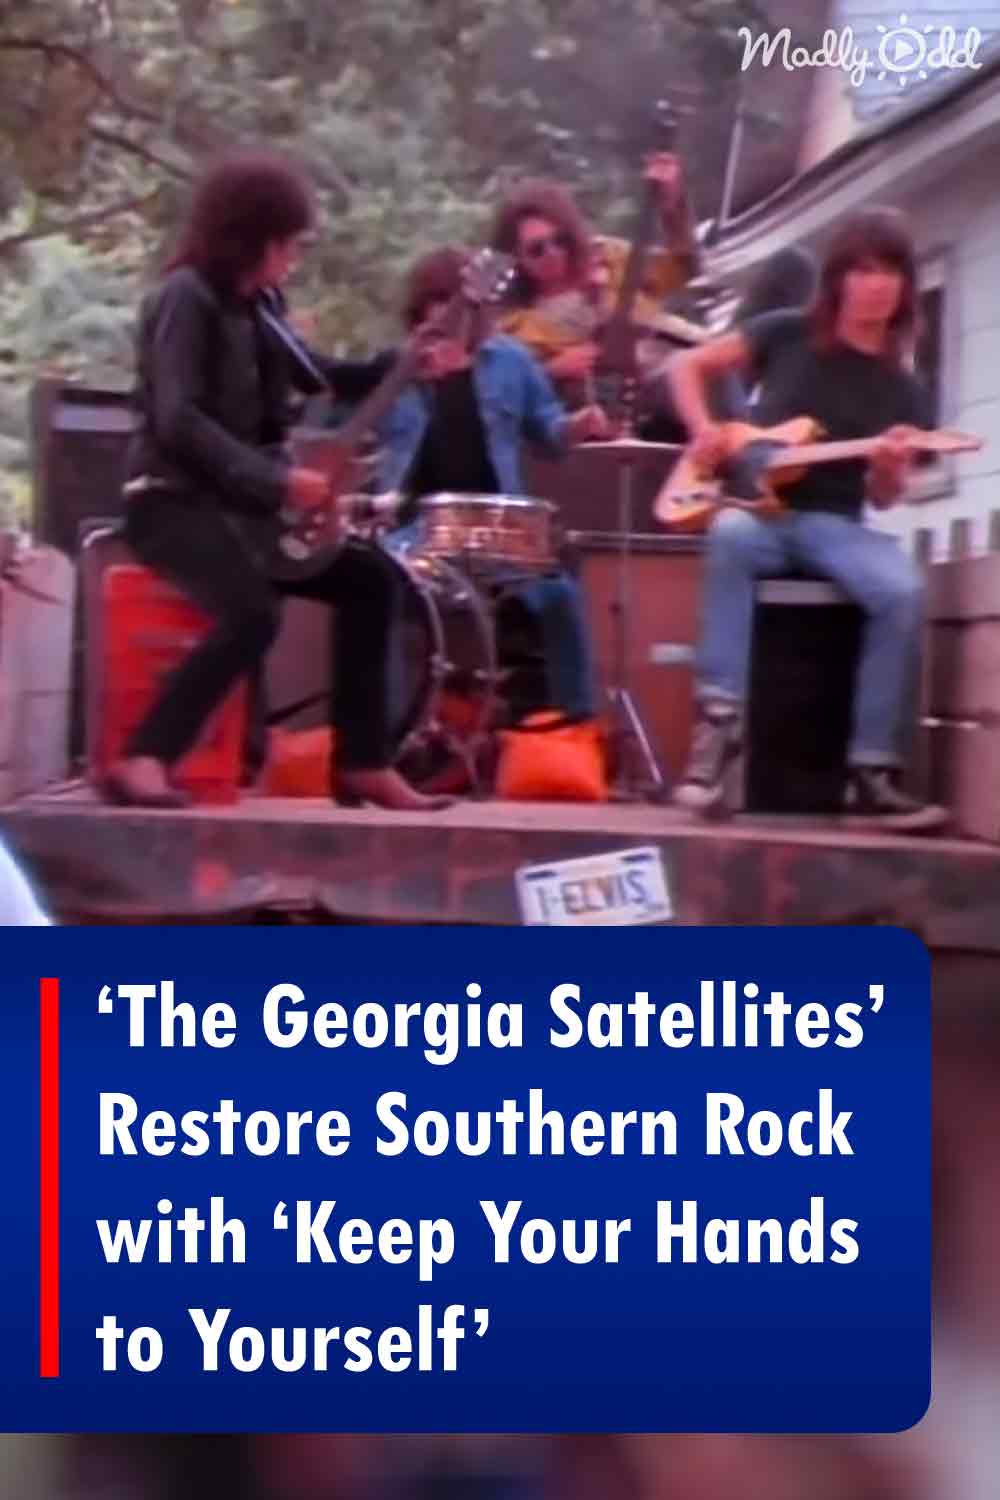 ‘The Georgia Satellites’ Restore Southern Rock with ‘Keep Your Hands to Yourself’